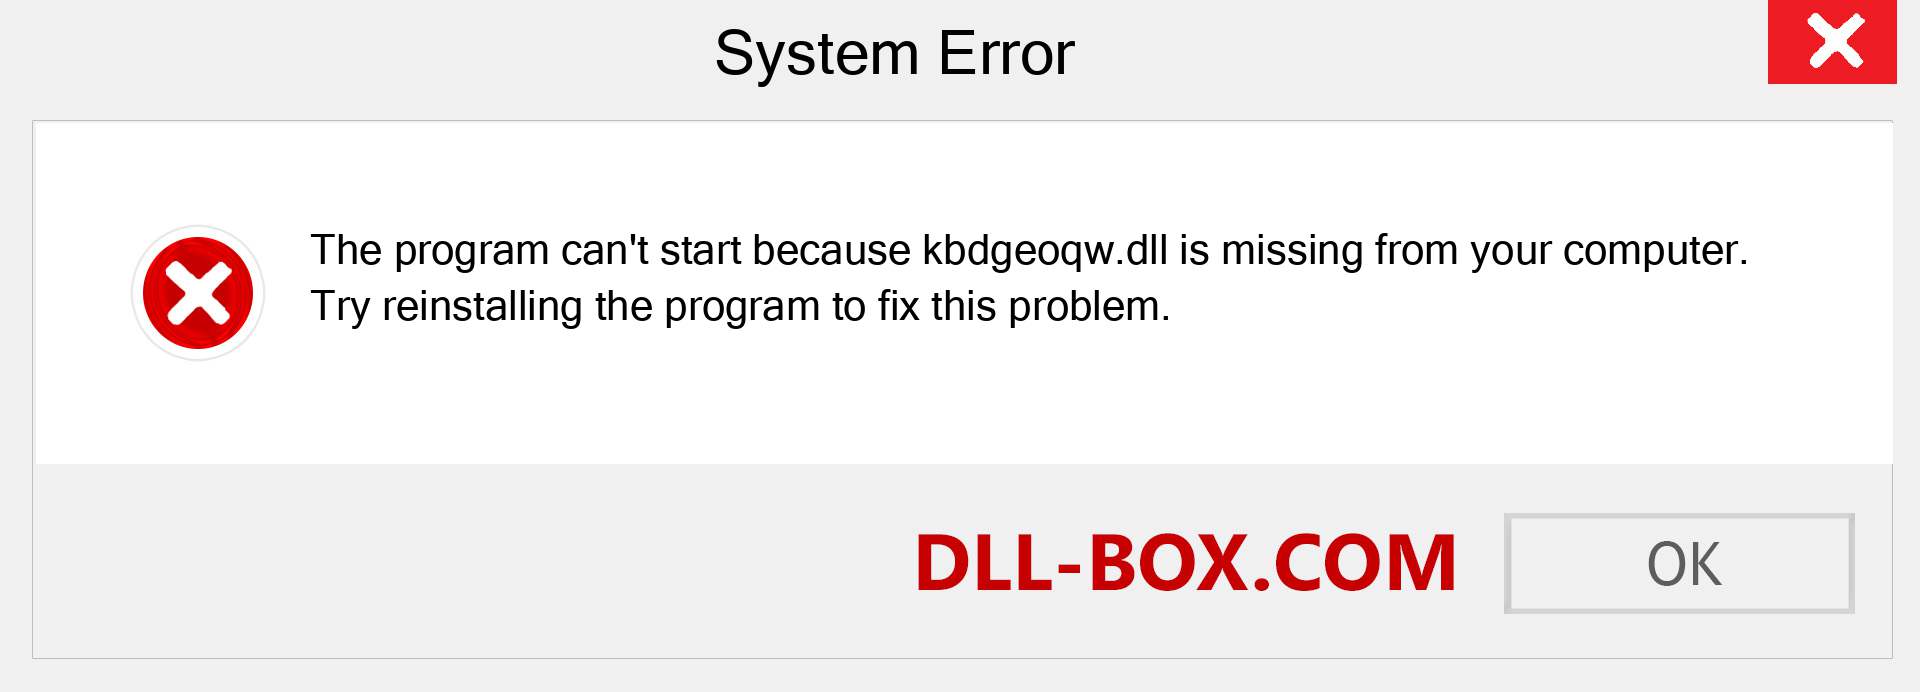  kbdgeoqw.dll file is missing?. Download for Windows 7, 8, 10 - Fix  kbdgeoqw dll Missing Error on Windows, photos, images